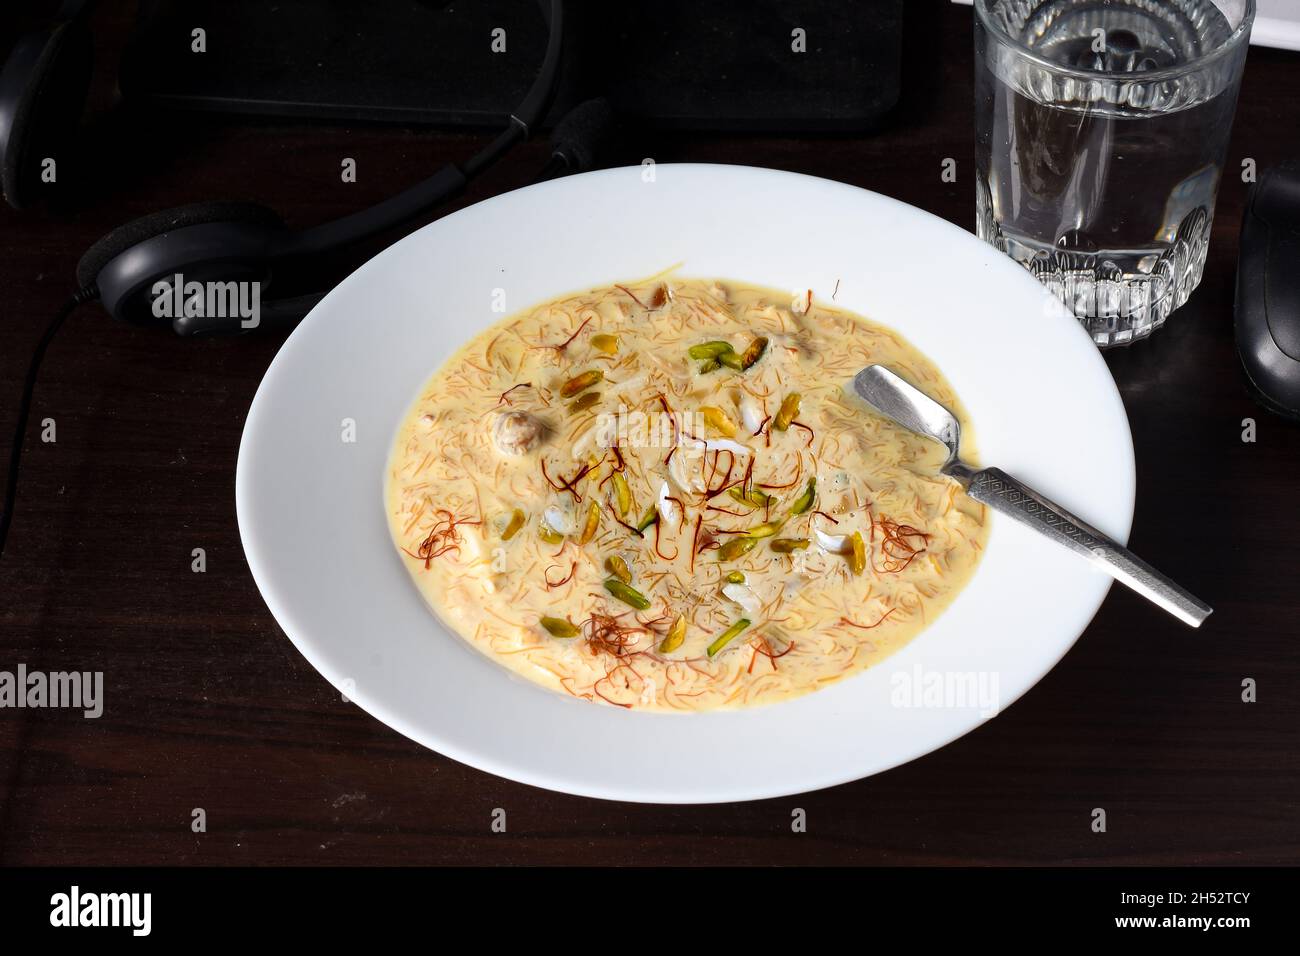 Sheer Khurma prepared with milk and vermicelli, garnished with saffron, pistachios and nuts. Stock Photo